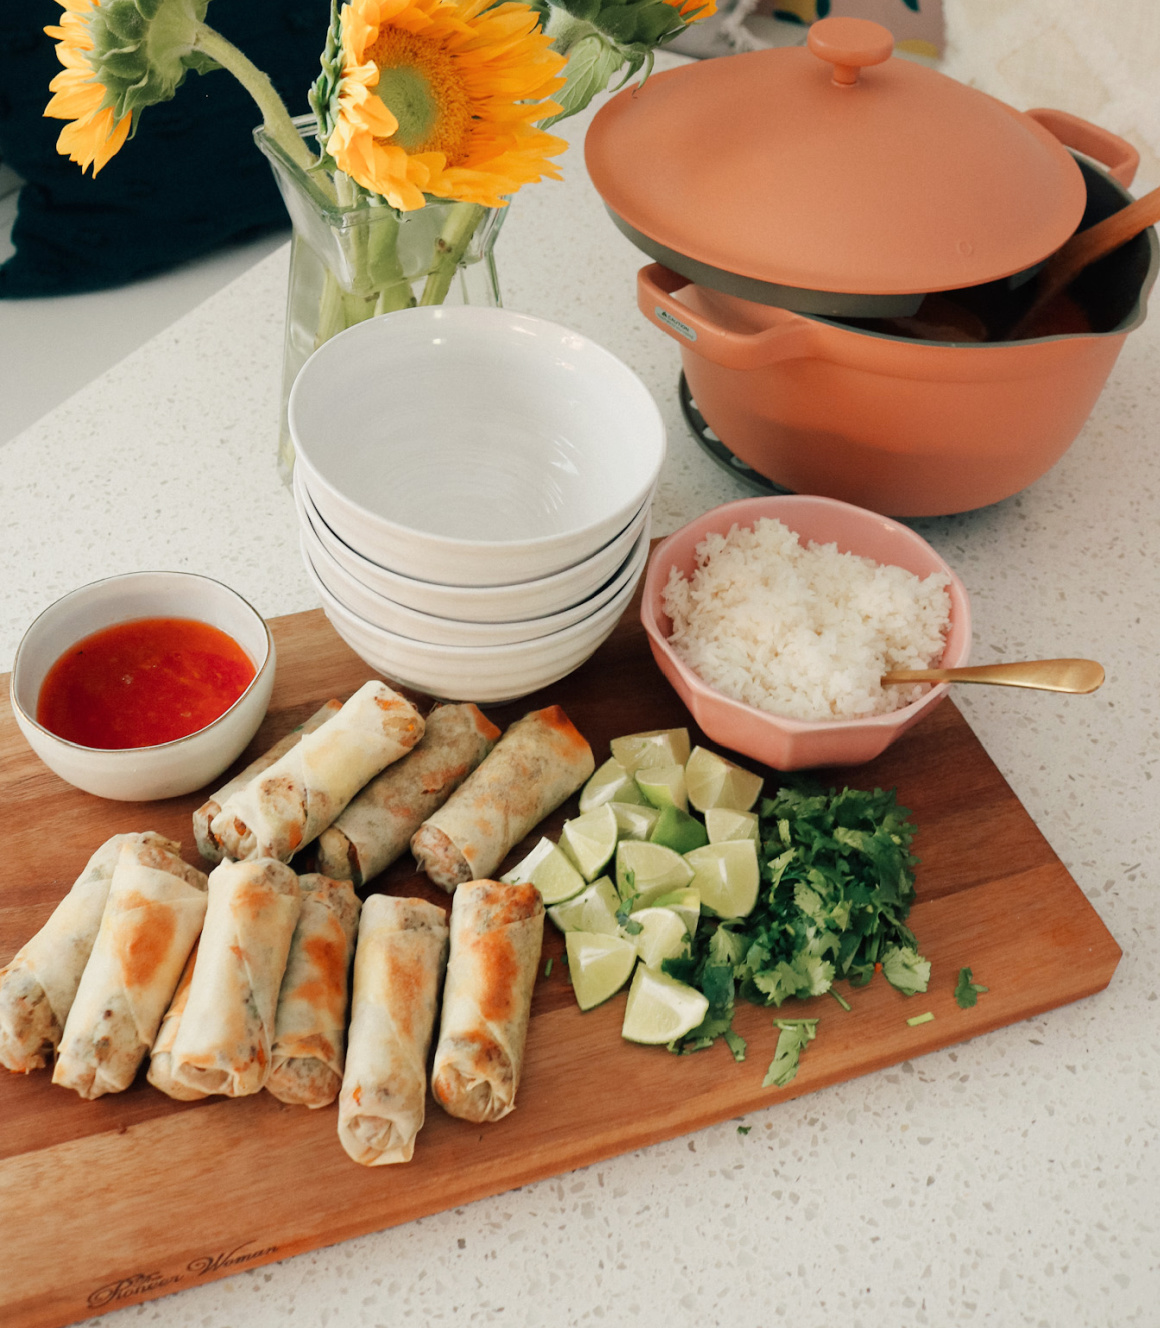 Easy Egg Roll Recipe- Oven Baked- Everyone will love!